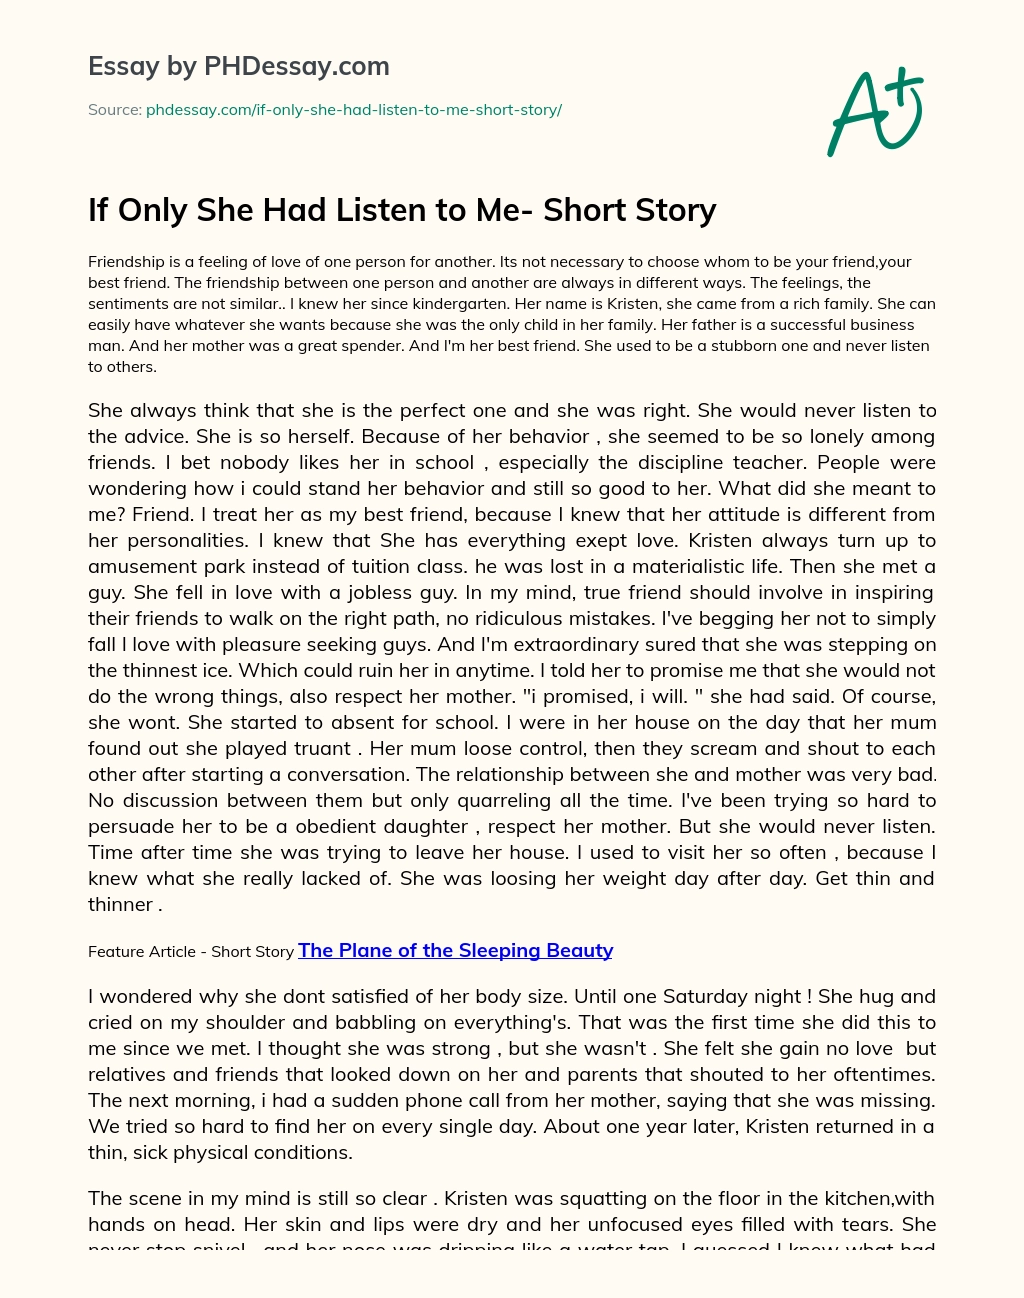 If Only She Had Listen to Me- Short Story essay